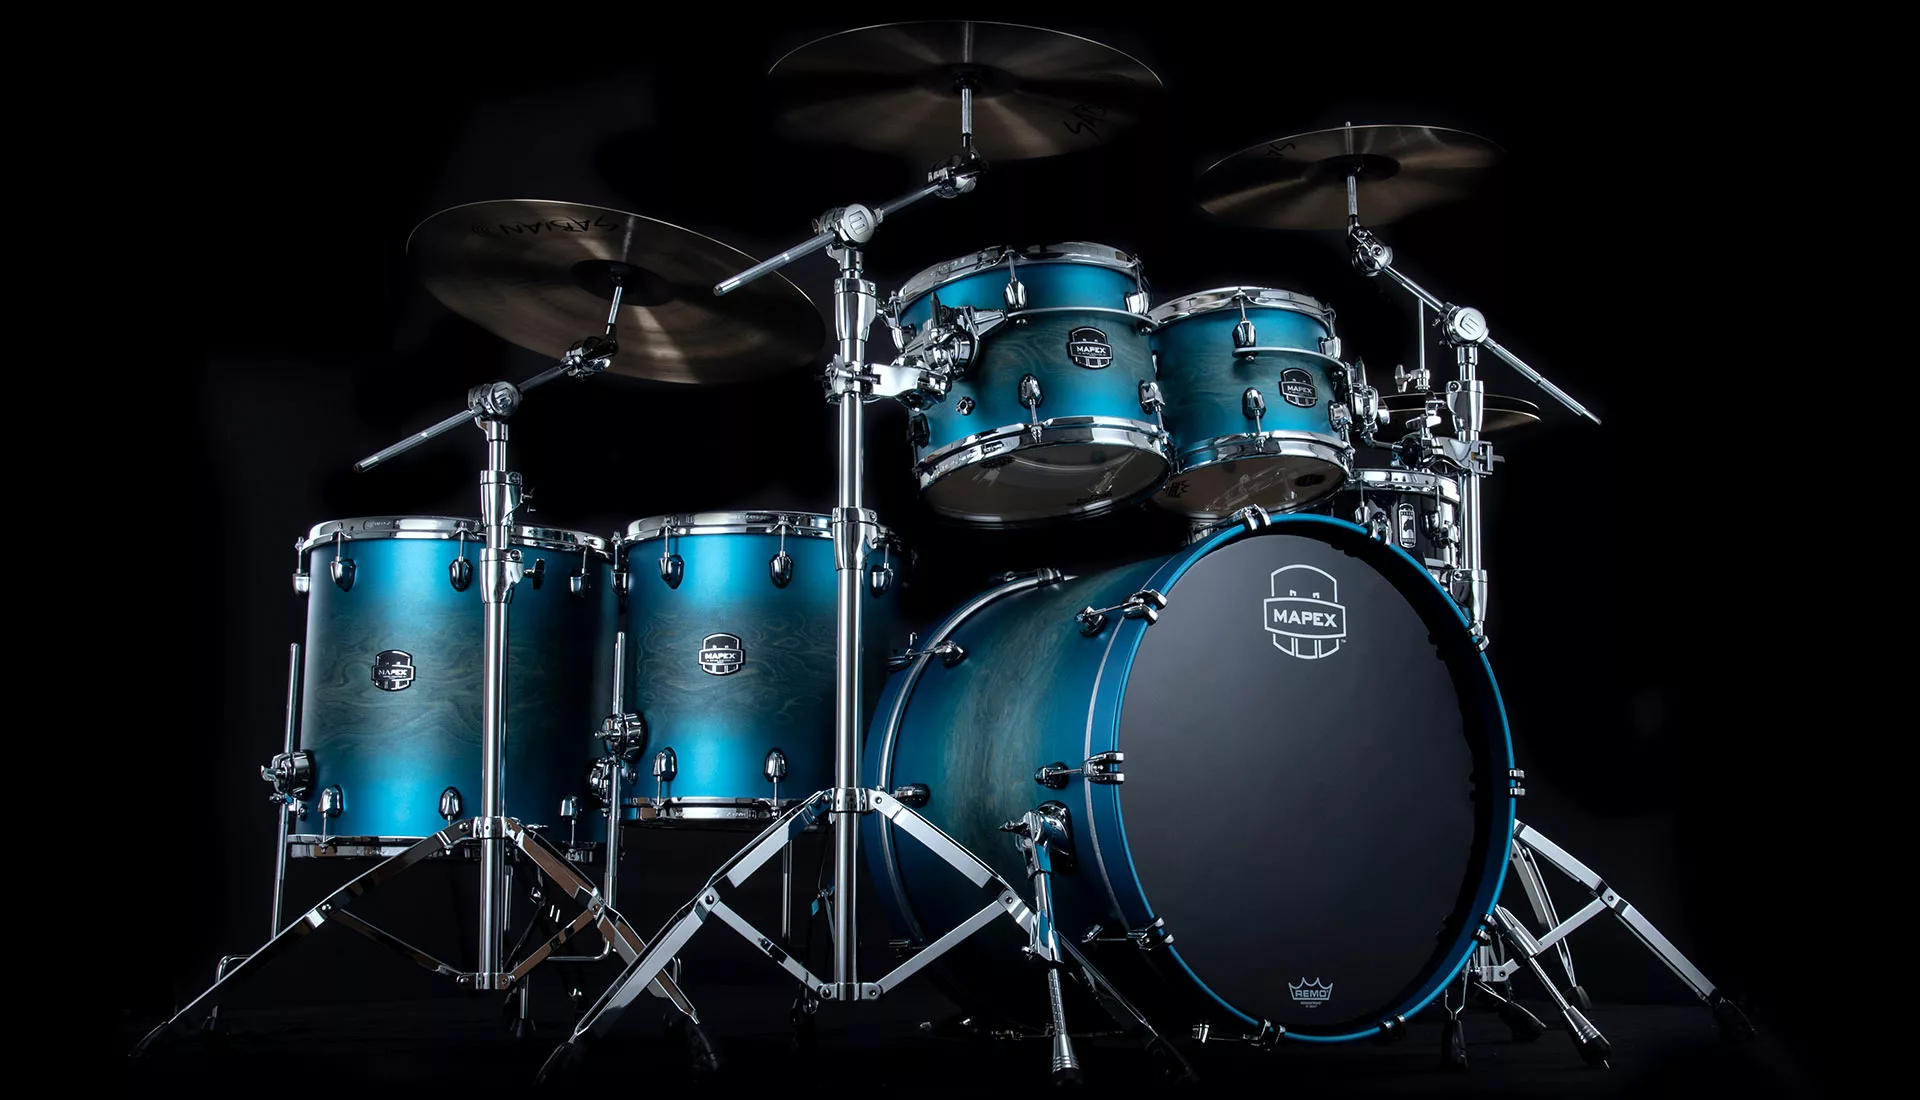 The Mapex Saturn Evolution – Can it get any better?